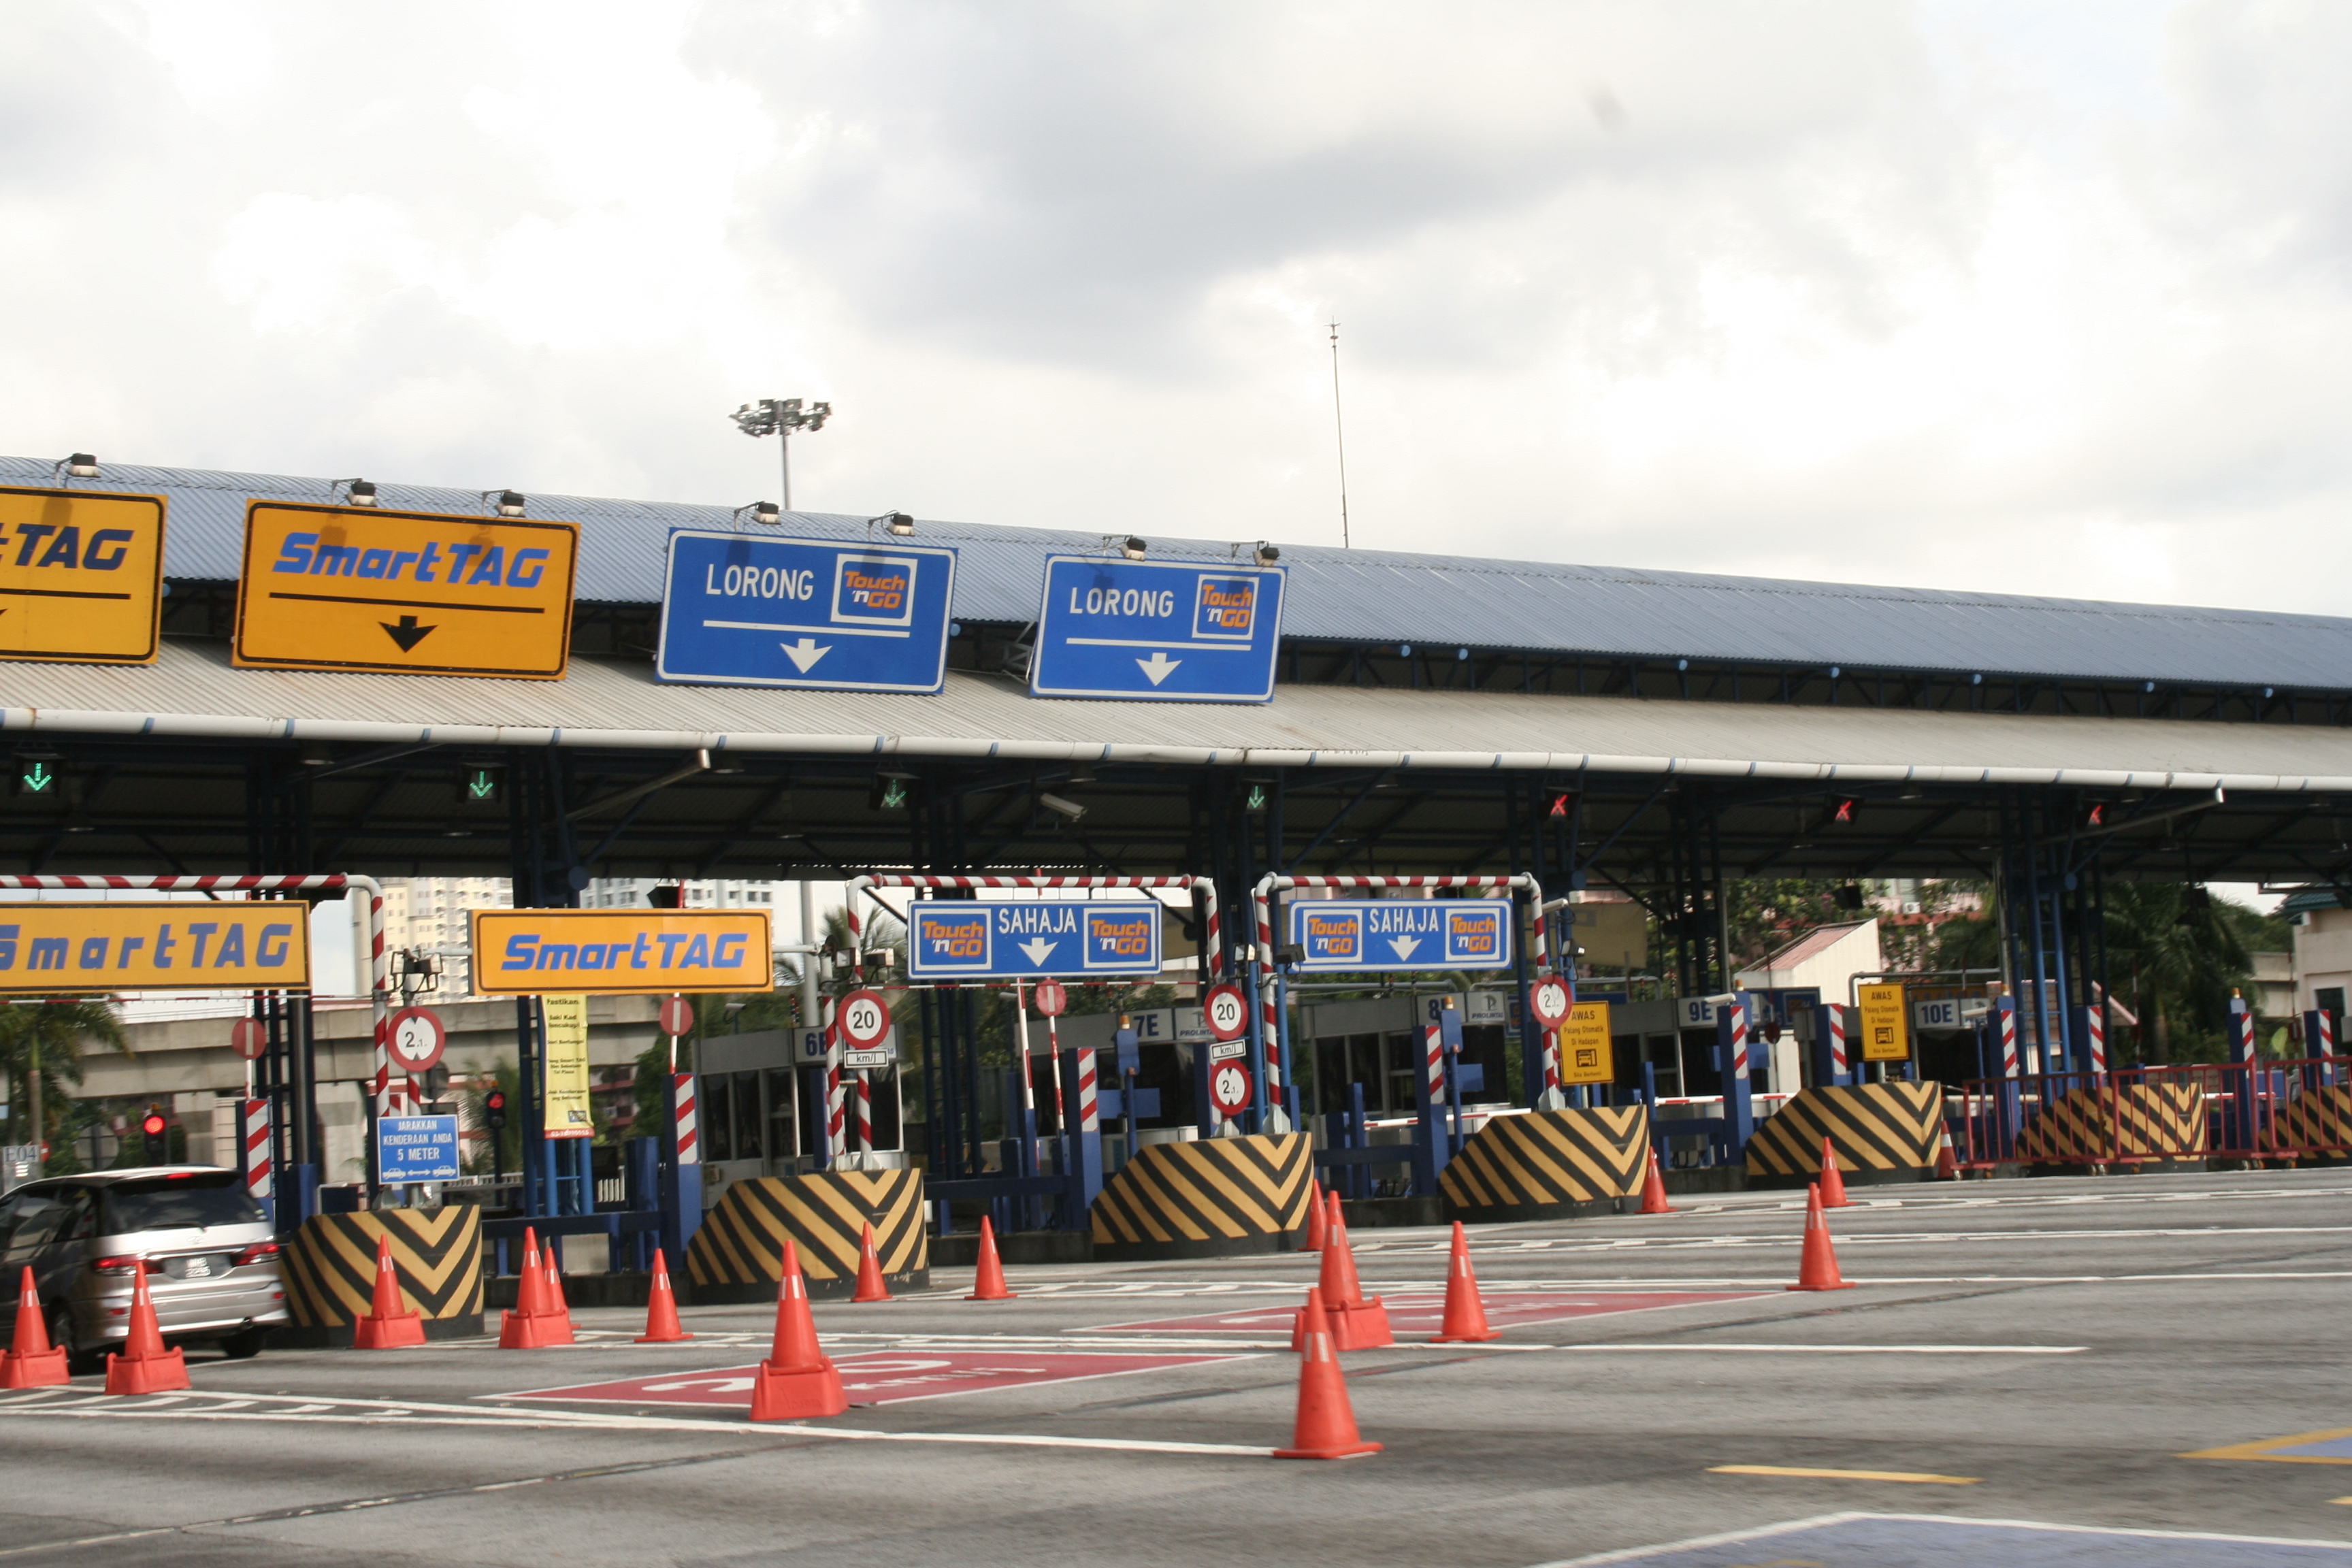 #Toll: Toll Rates For 8 Highways Expected To Go Up In 2016 | Hype Malaysia